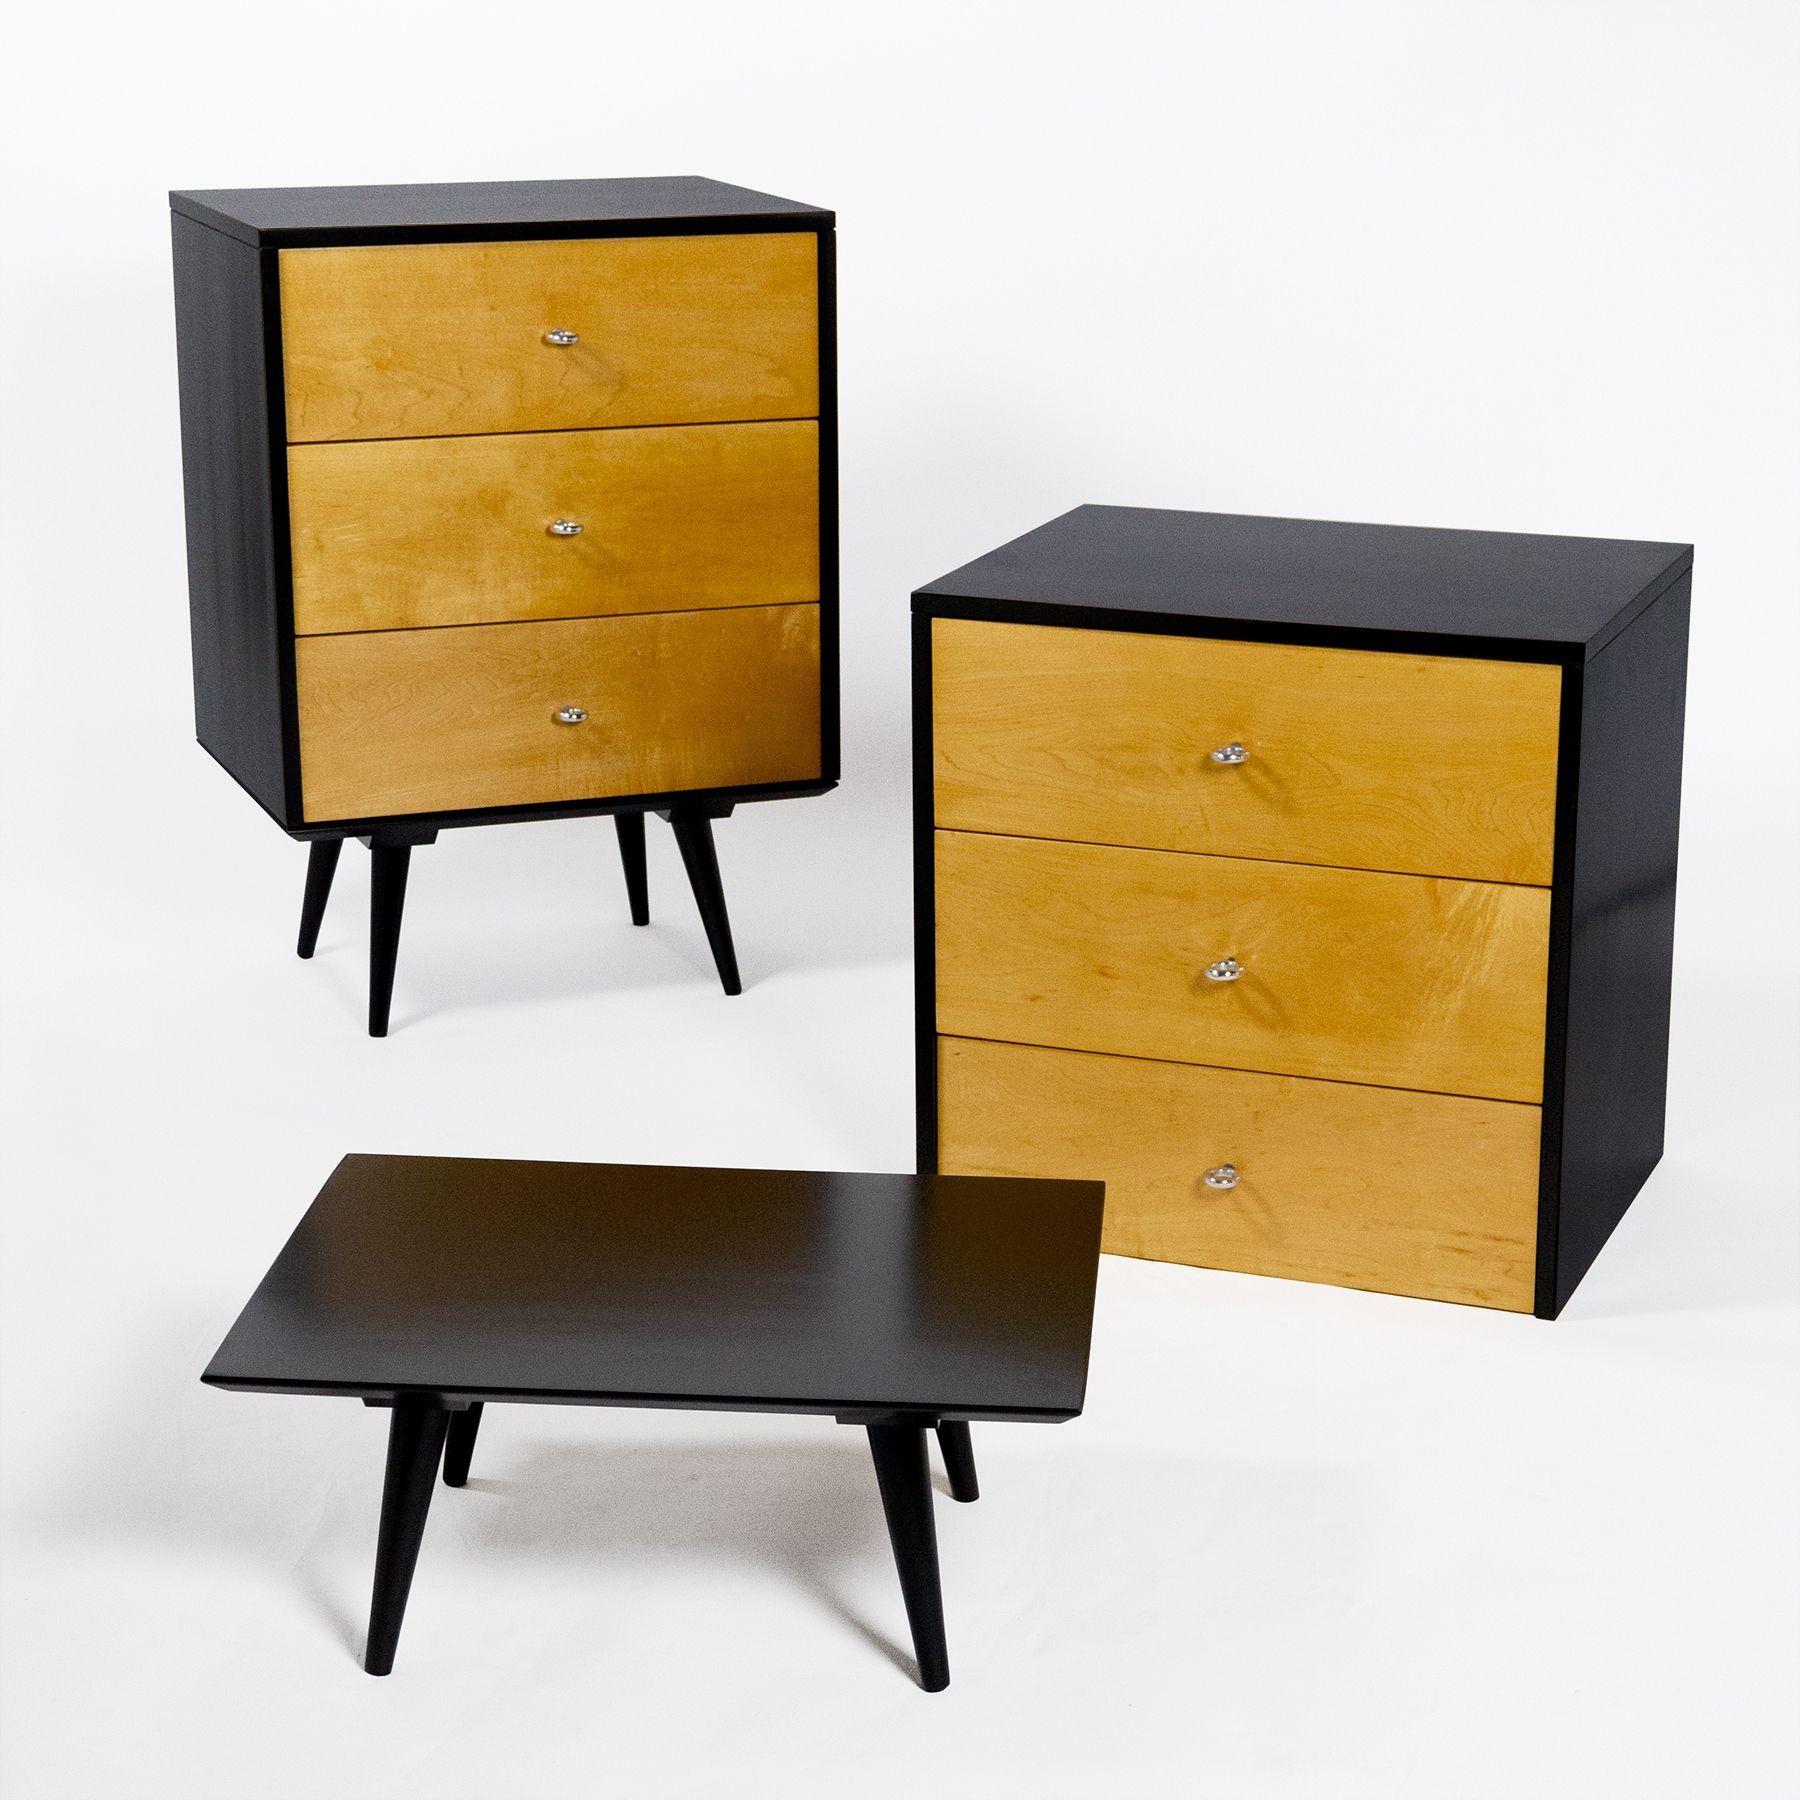 Pair of three drawer solid maple cabinets with original aluminum ring pulls that rest on separate square tables. Refinished as original in black and clear lacquer.